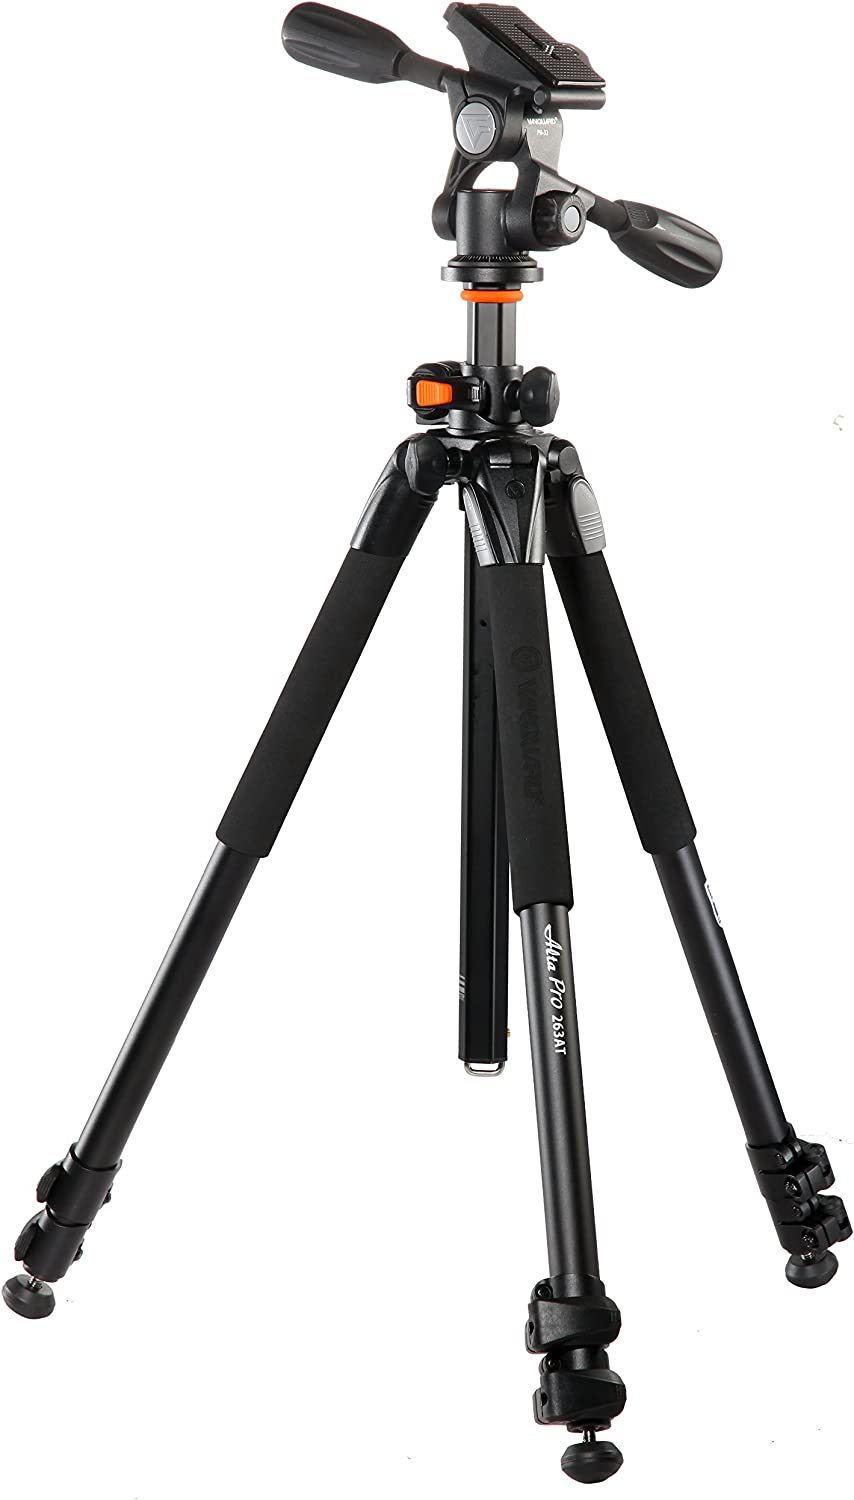 Primary image for Vanguard Alta Pro 263Ap Aluminum Tripod With Ph-32 Panhead For Sony,, Black